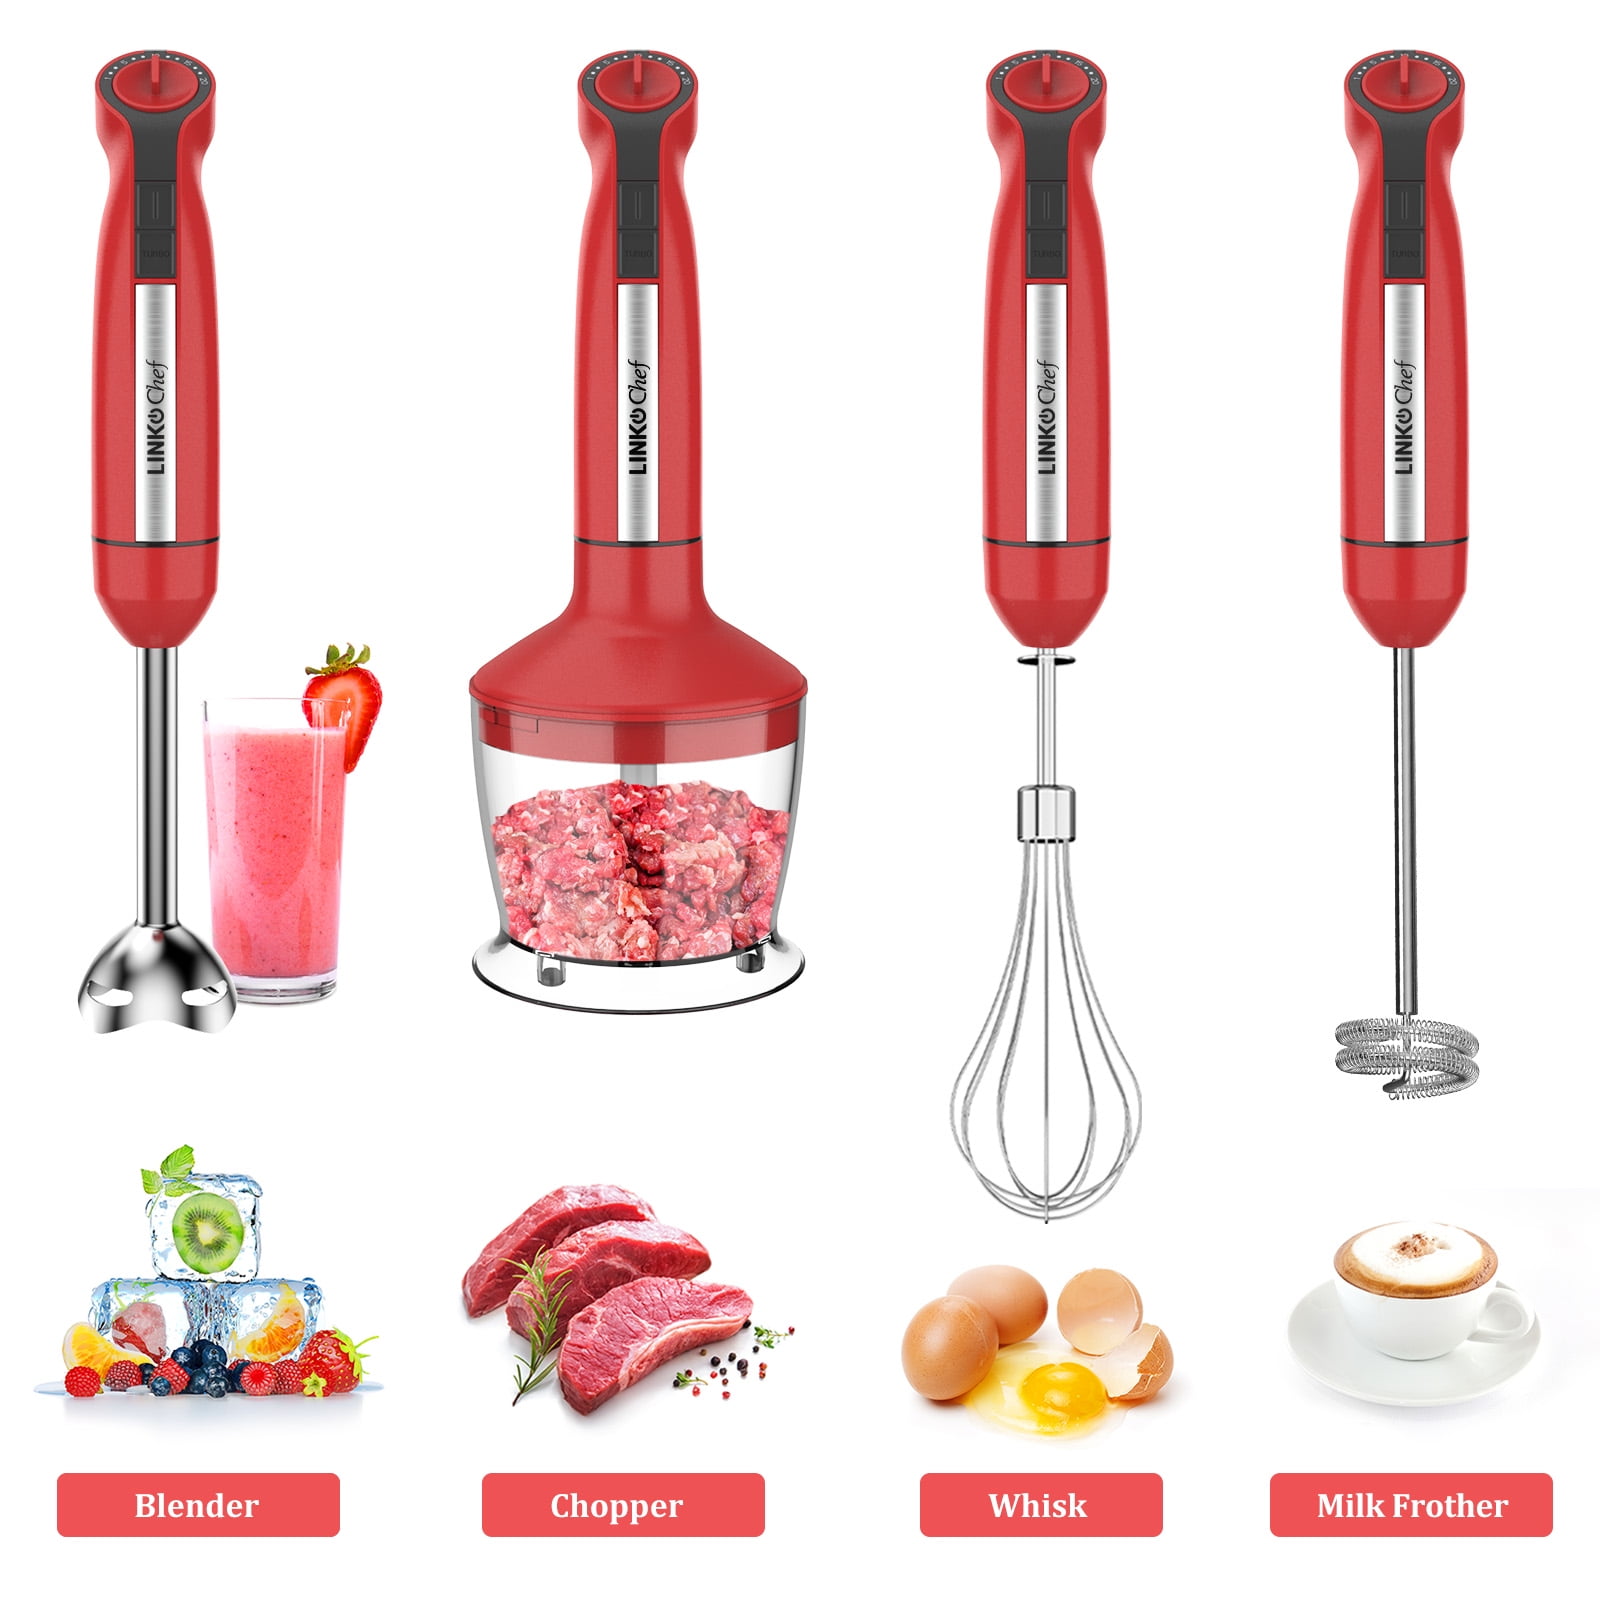 LINKChef Immersion Blender Handheld, Reinforced 800 Watt 5 Speed Turbo  Immersion Blender, Hand Blender for Shakes and Smoothies, 304 Stainless  Steel